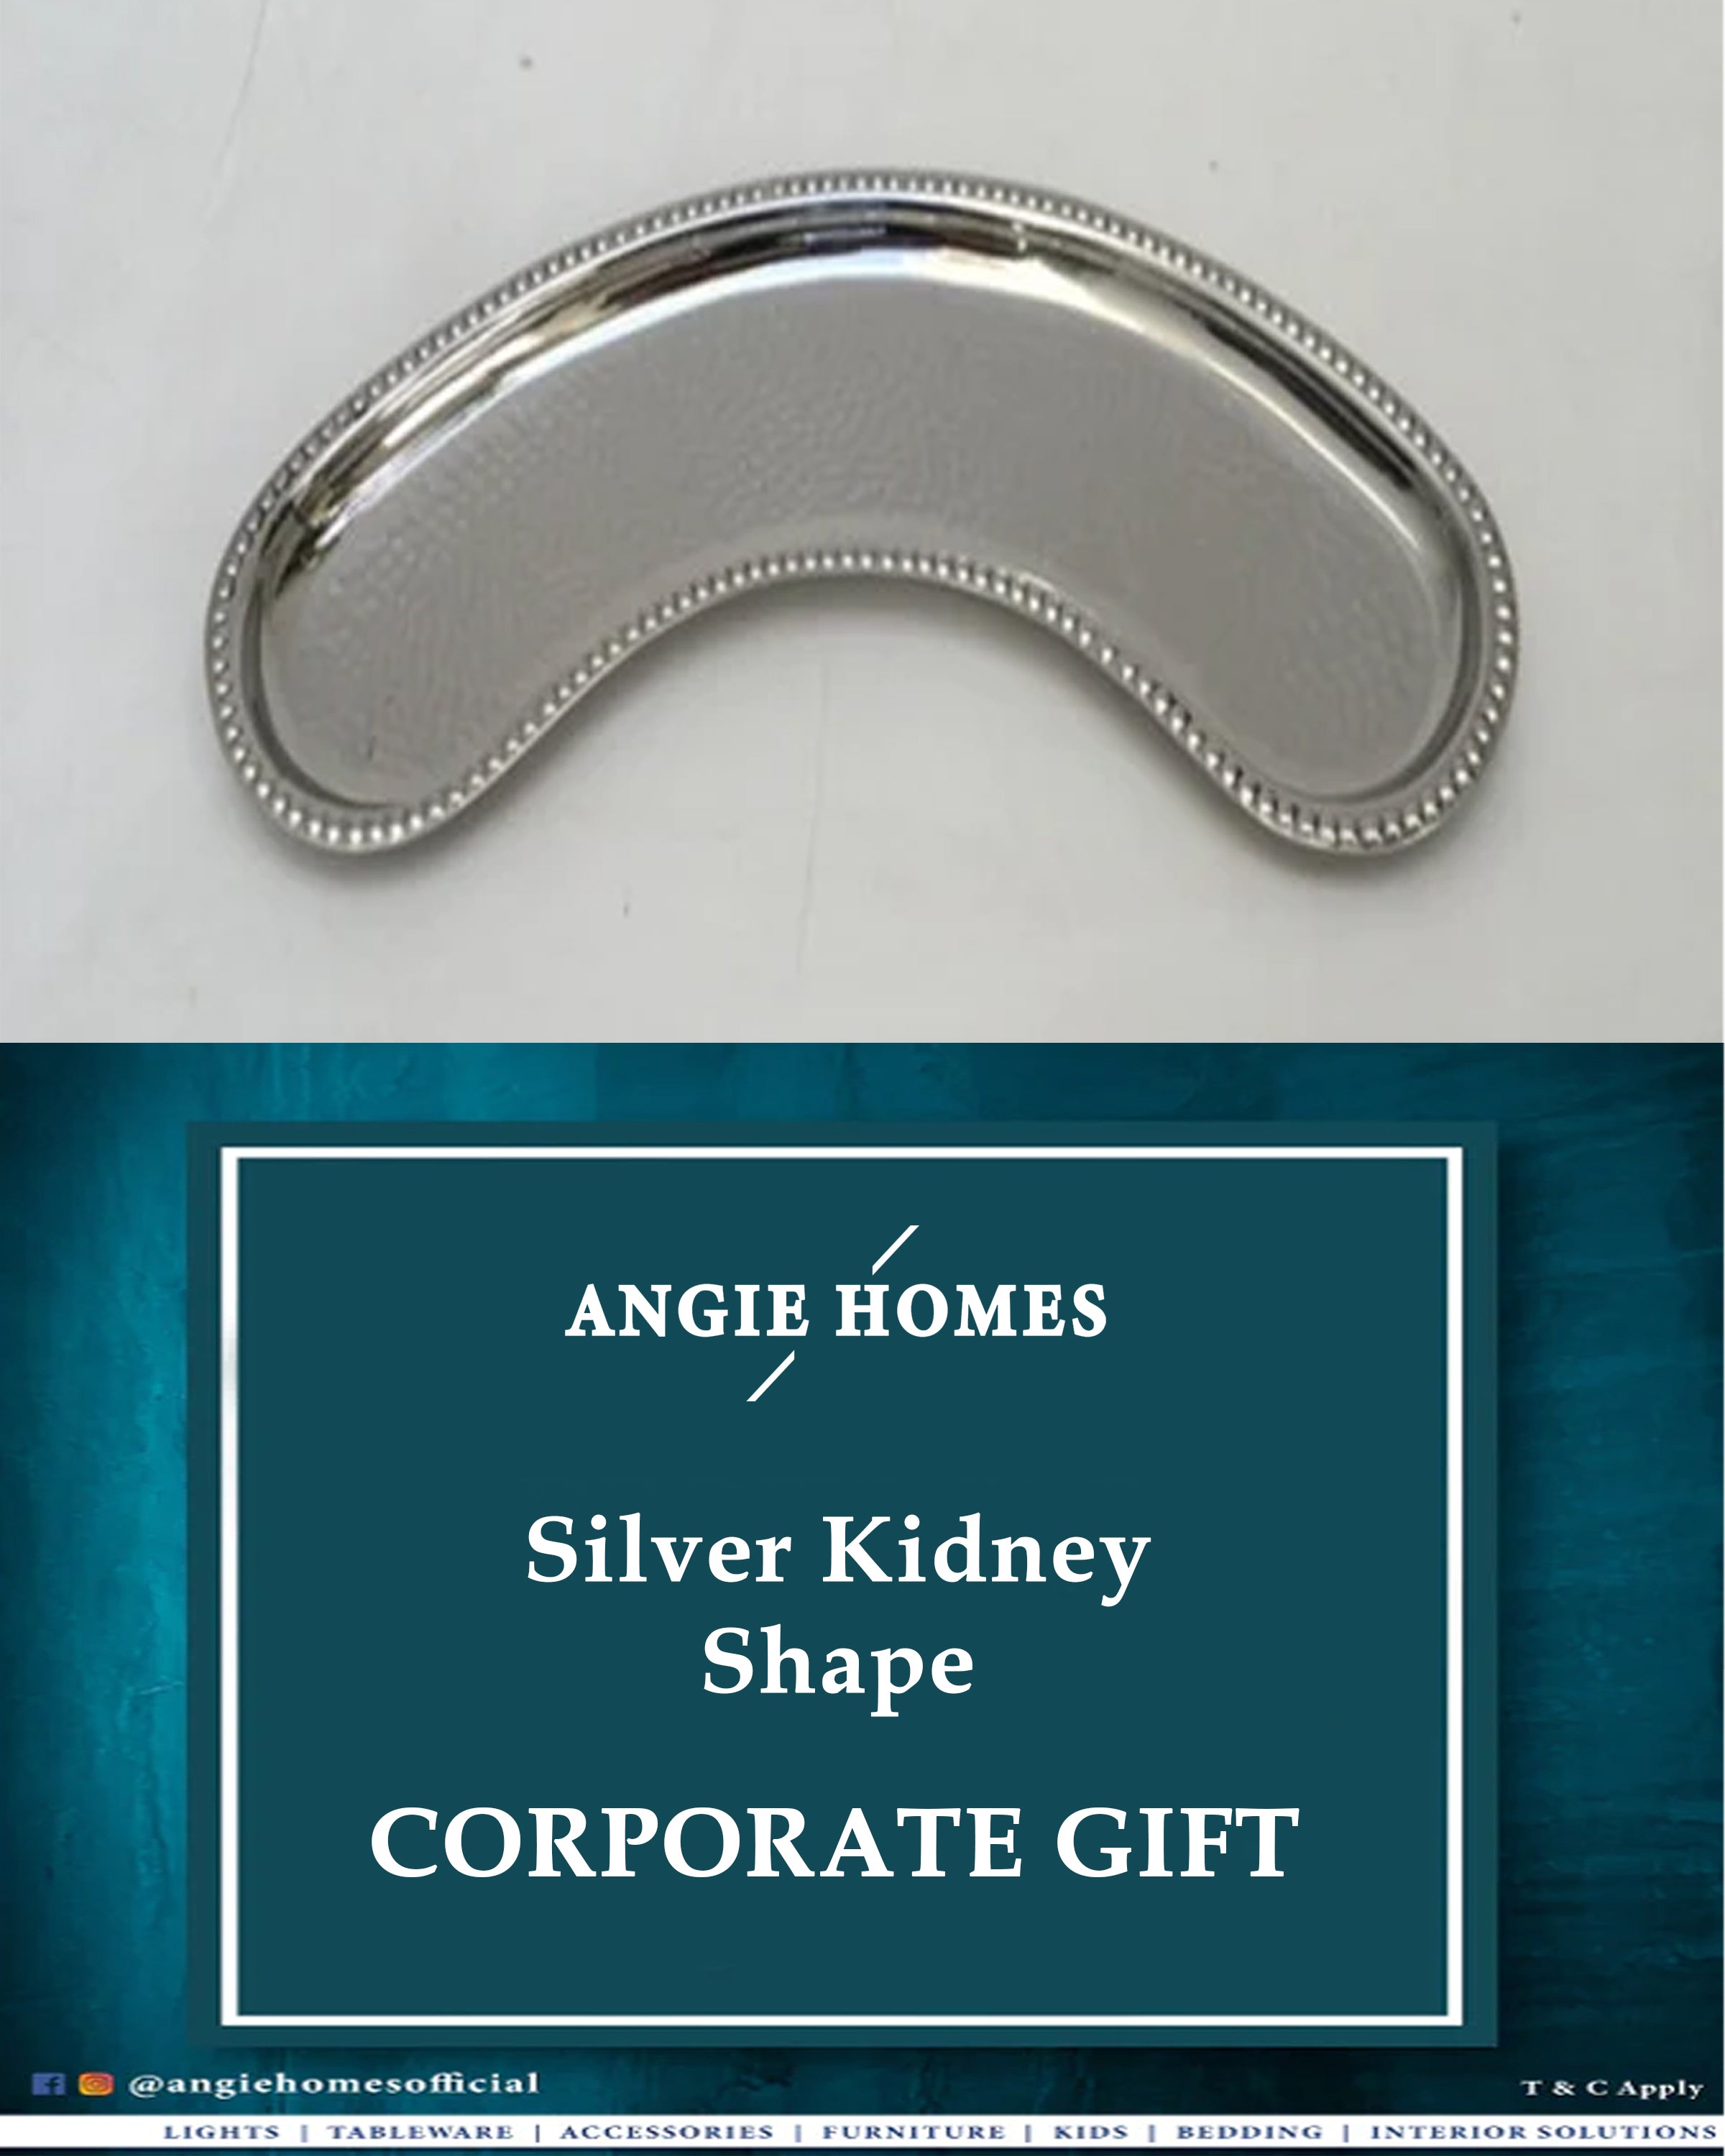 Kidney Shape Silver Plate for Wedding, House Warming & Corporate Gift ANGIE HOMES